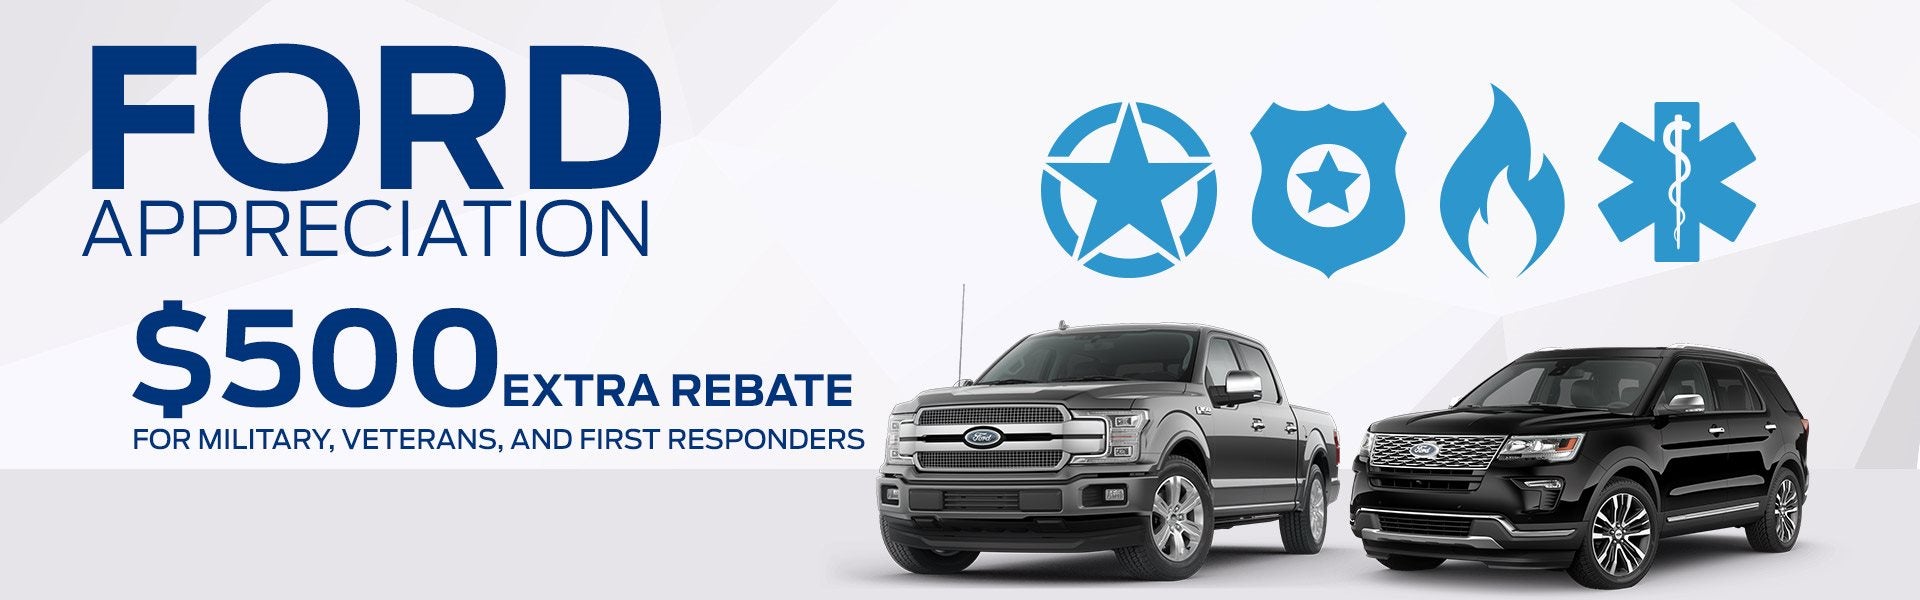 Ford appreciation for first responders